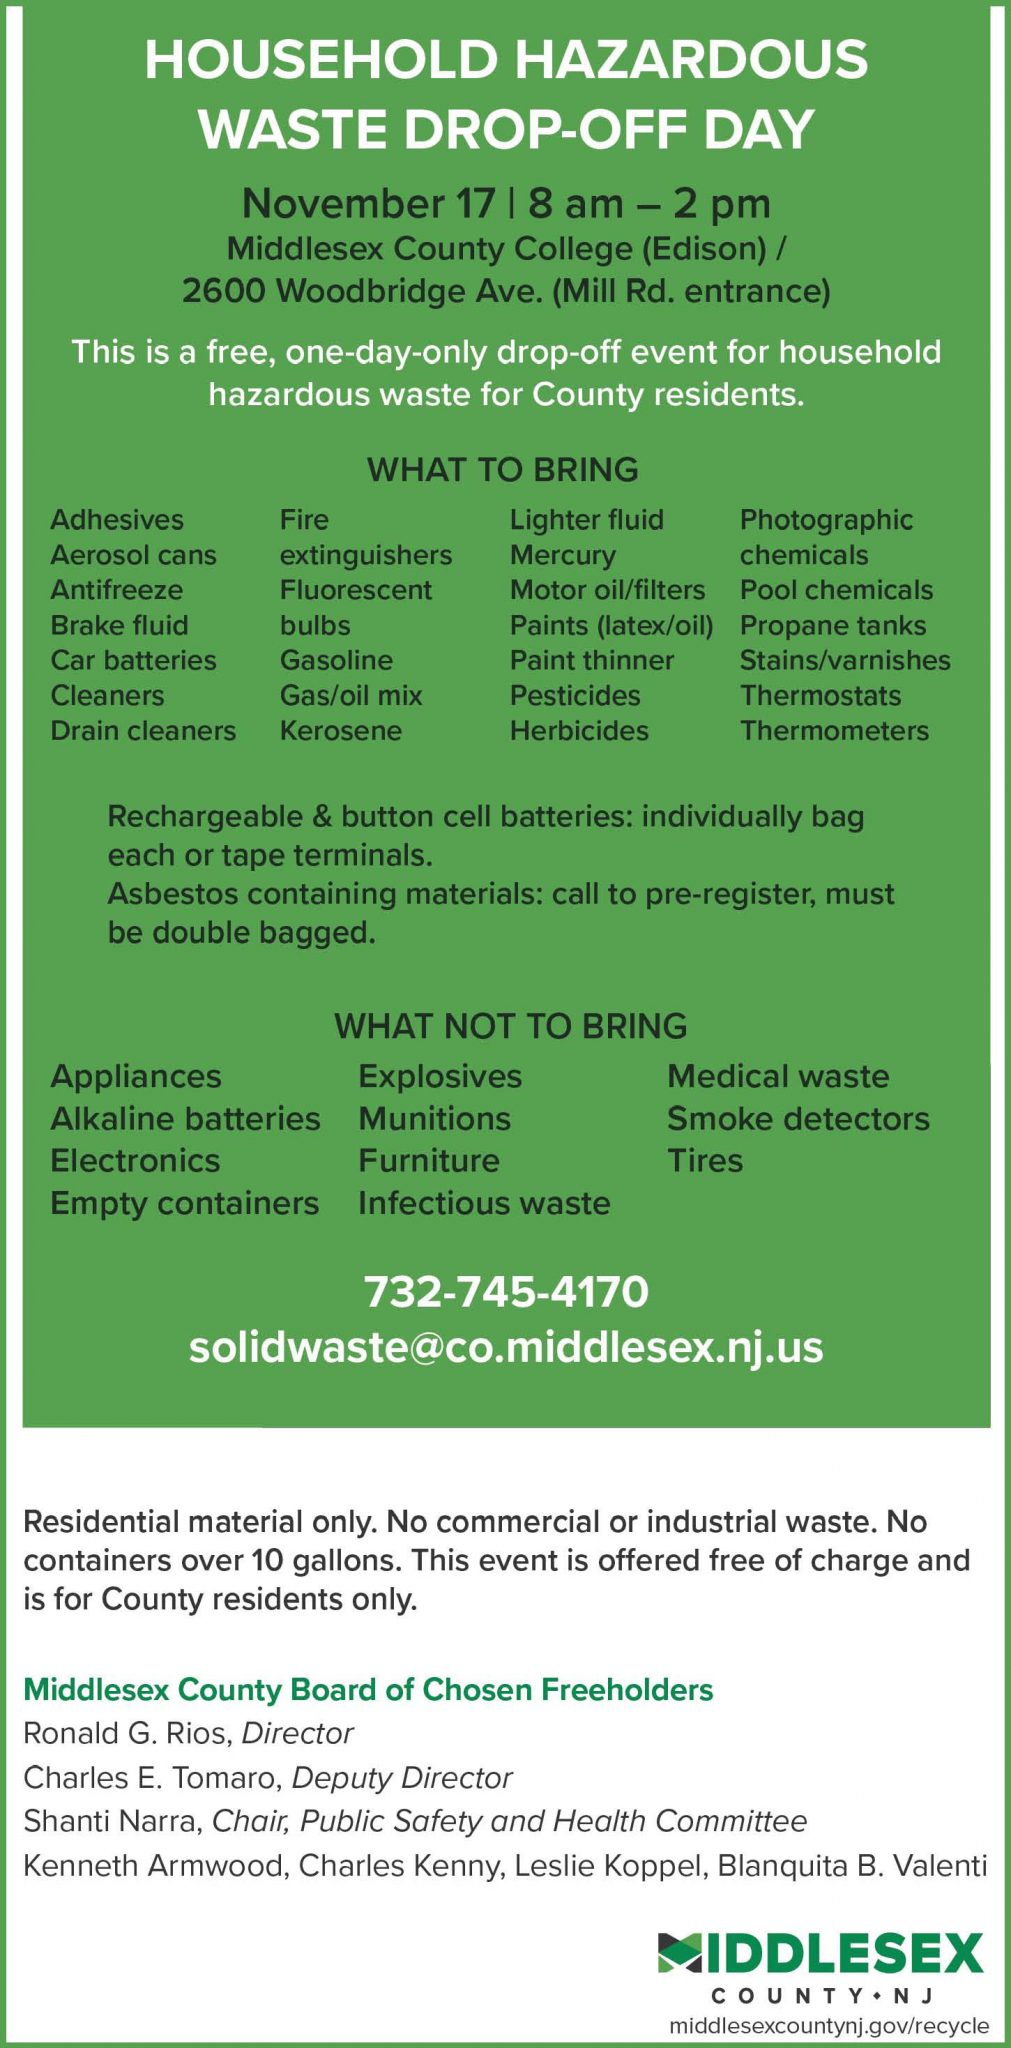 Middlesex County 2019 Household Hazardous Waste Drop-Off